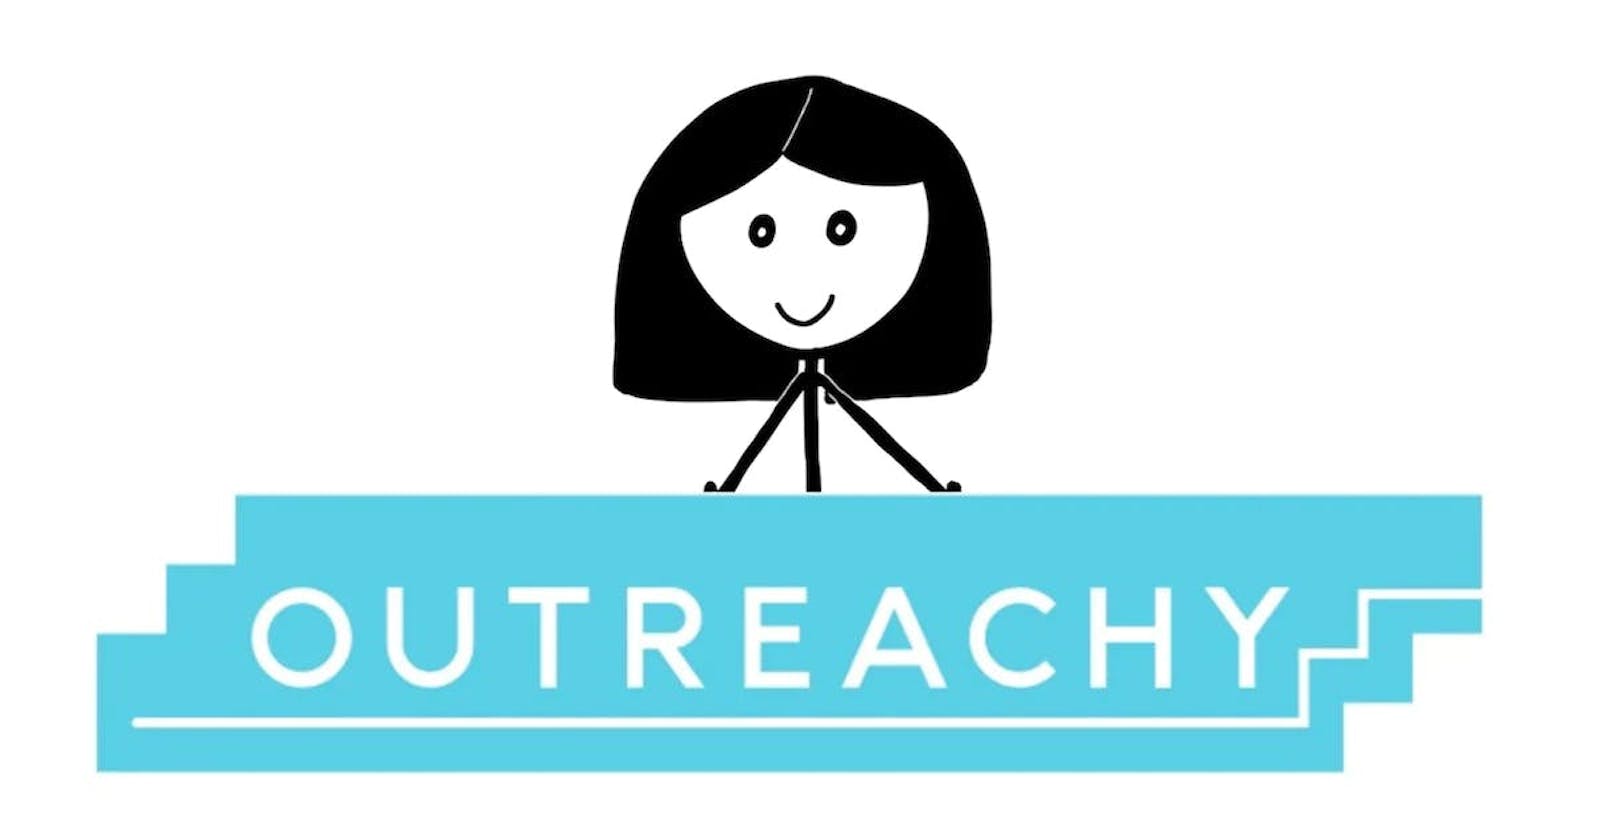 All About OUTREACHY!